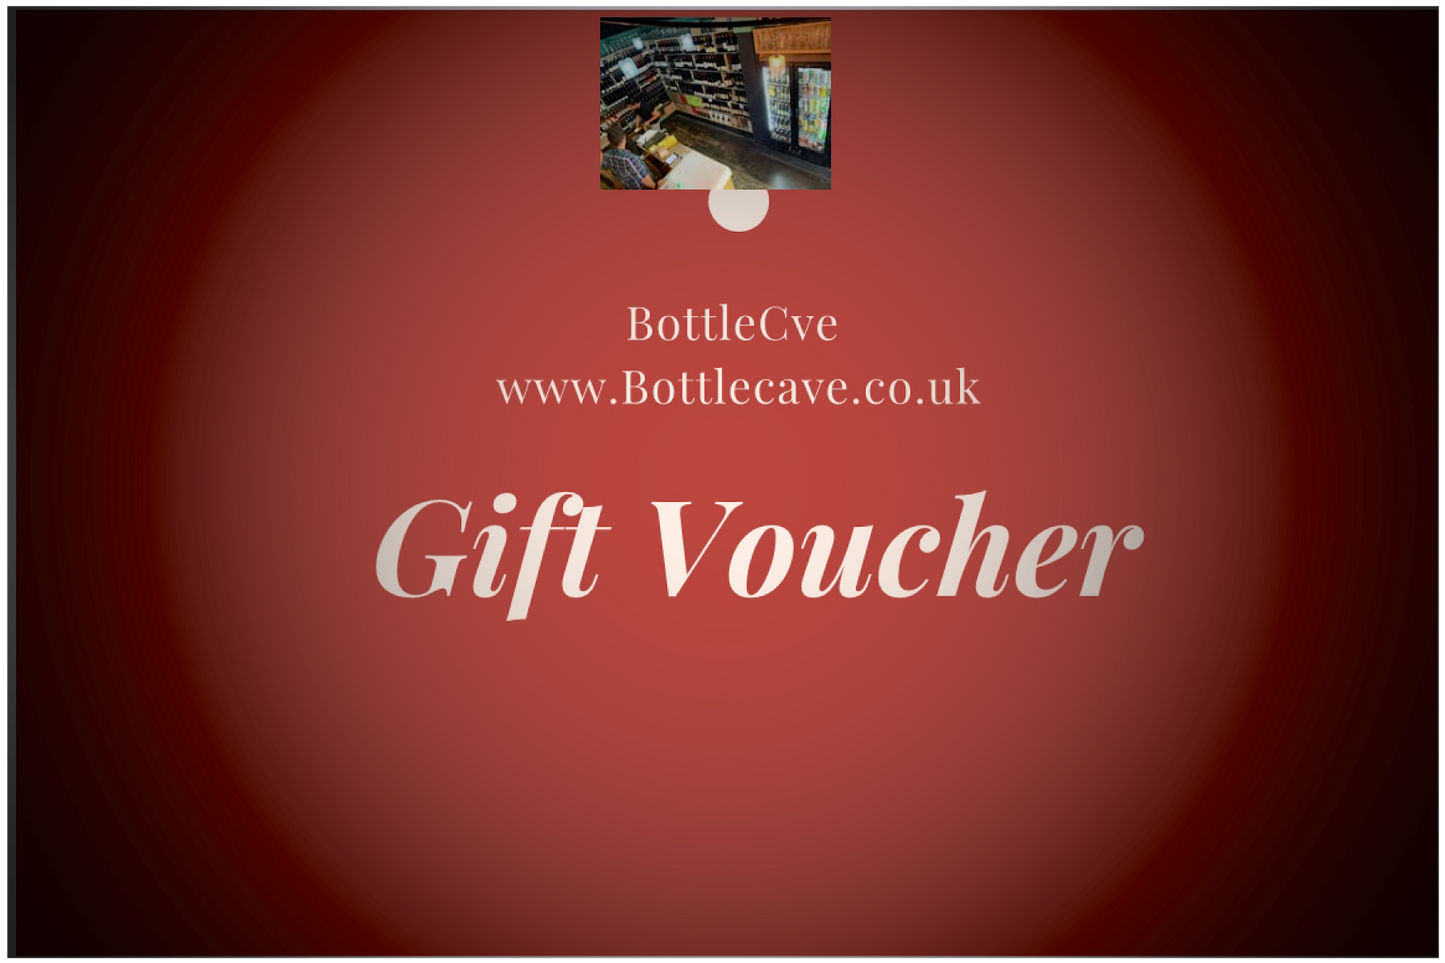 BottleCave Online Gift Card £10-£100 available